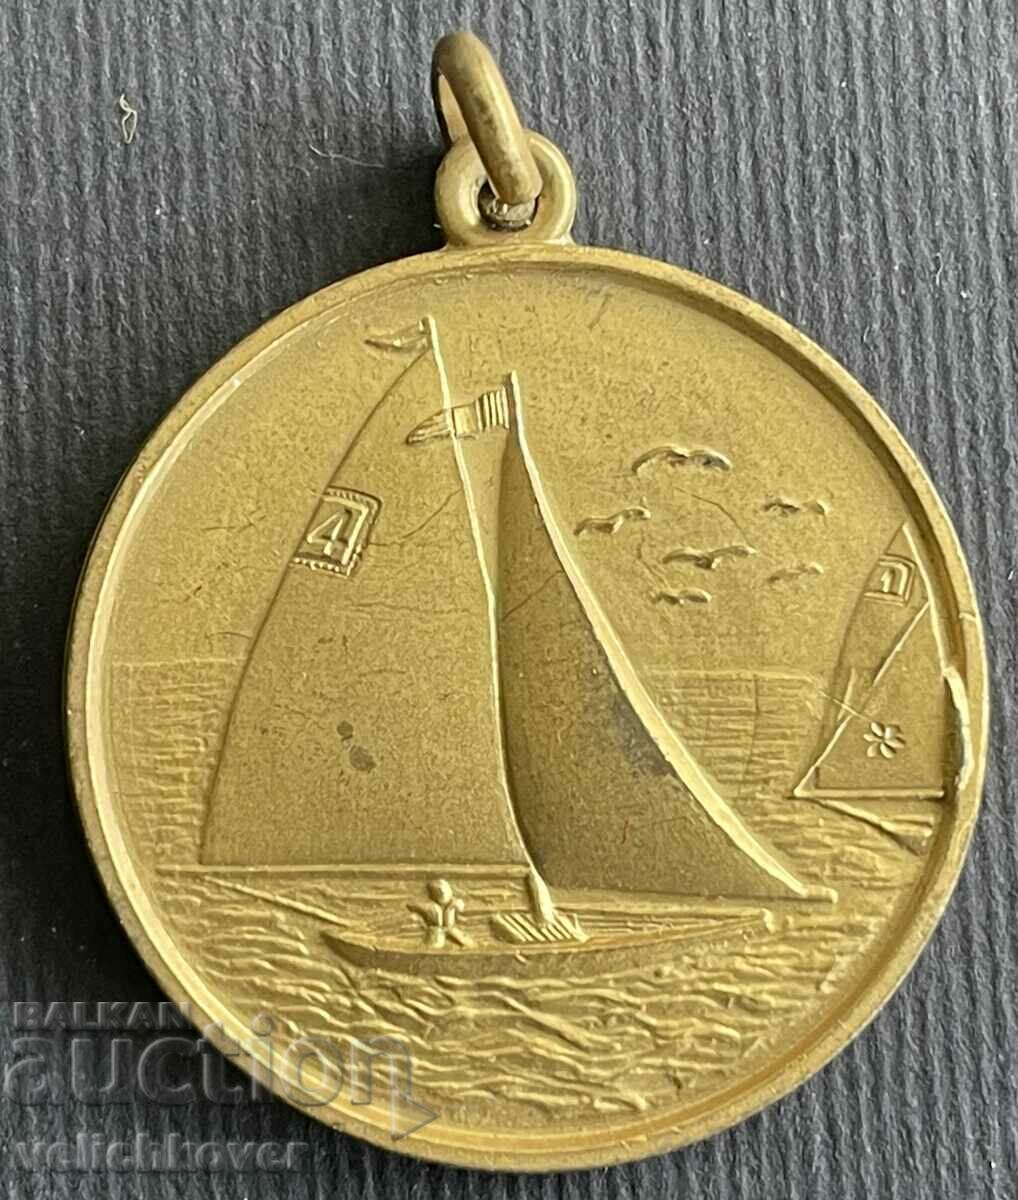 36648 Italy medal for participation in yacht regatta 2000